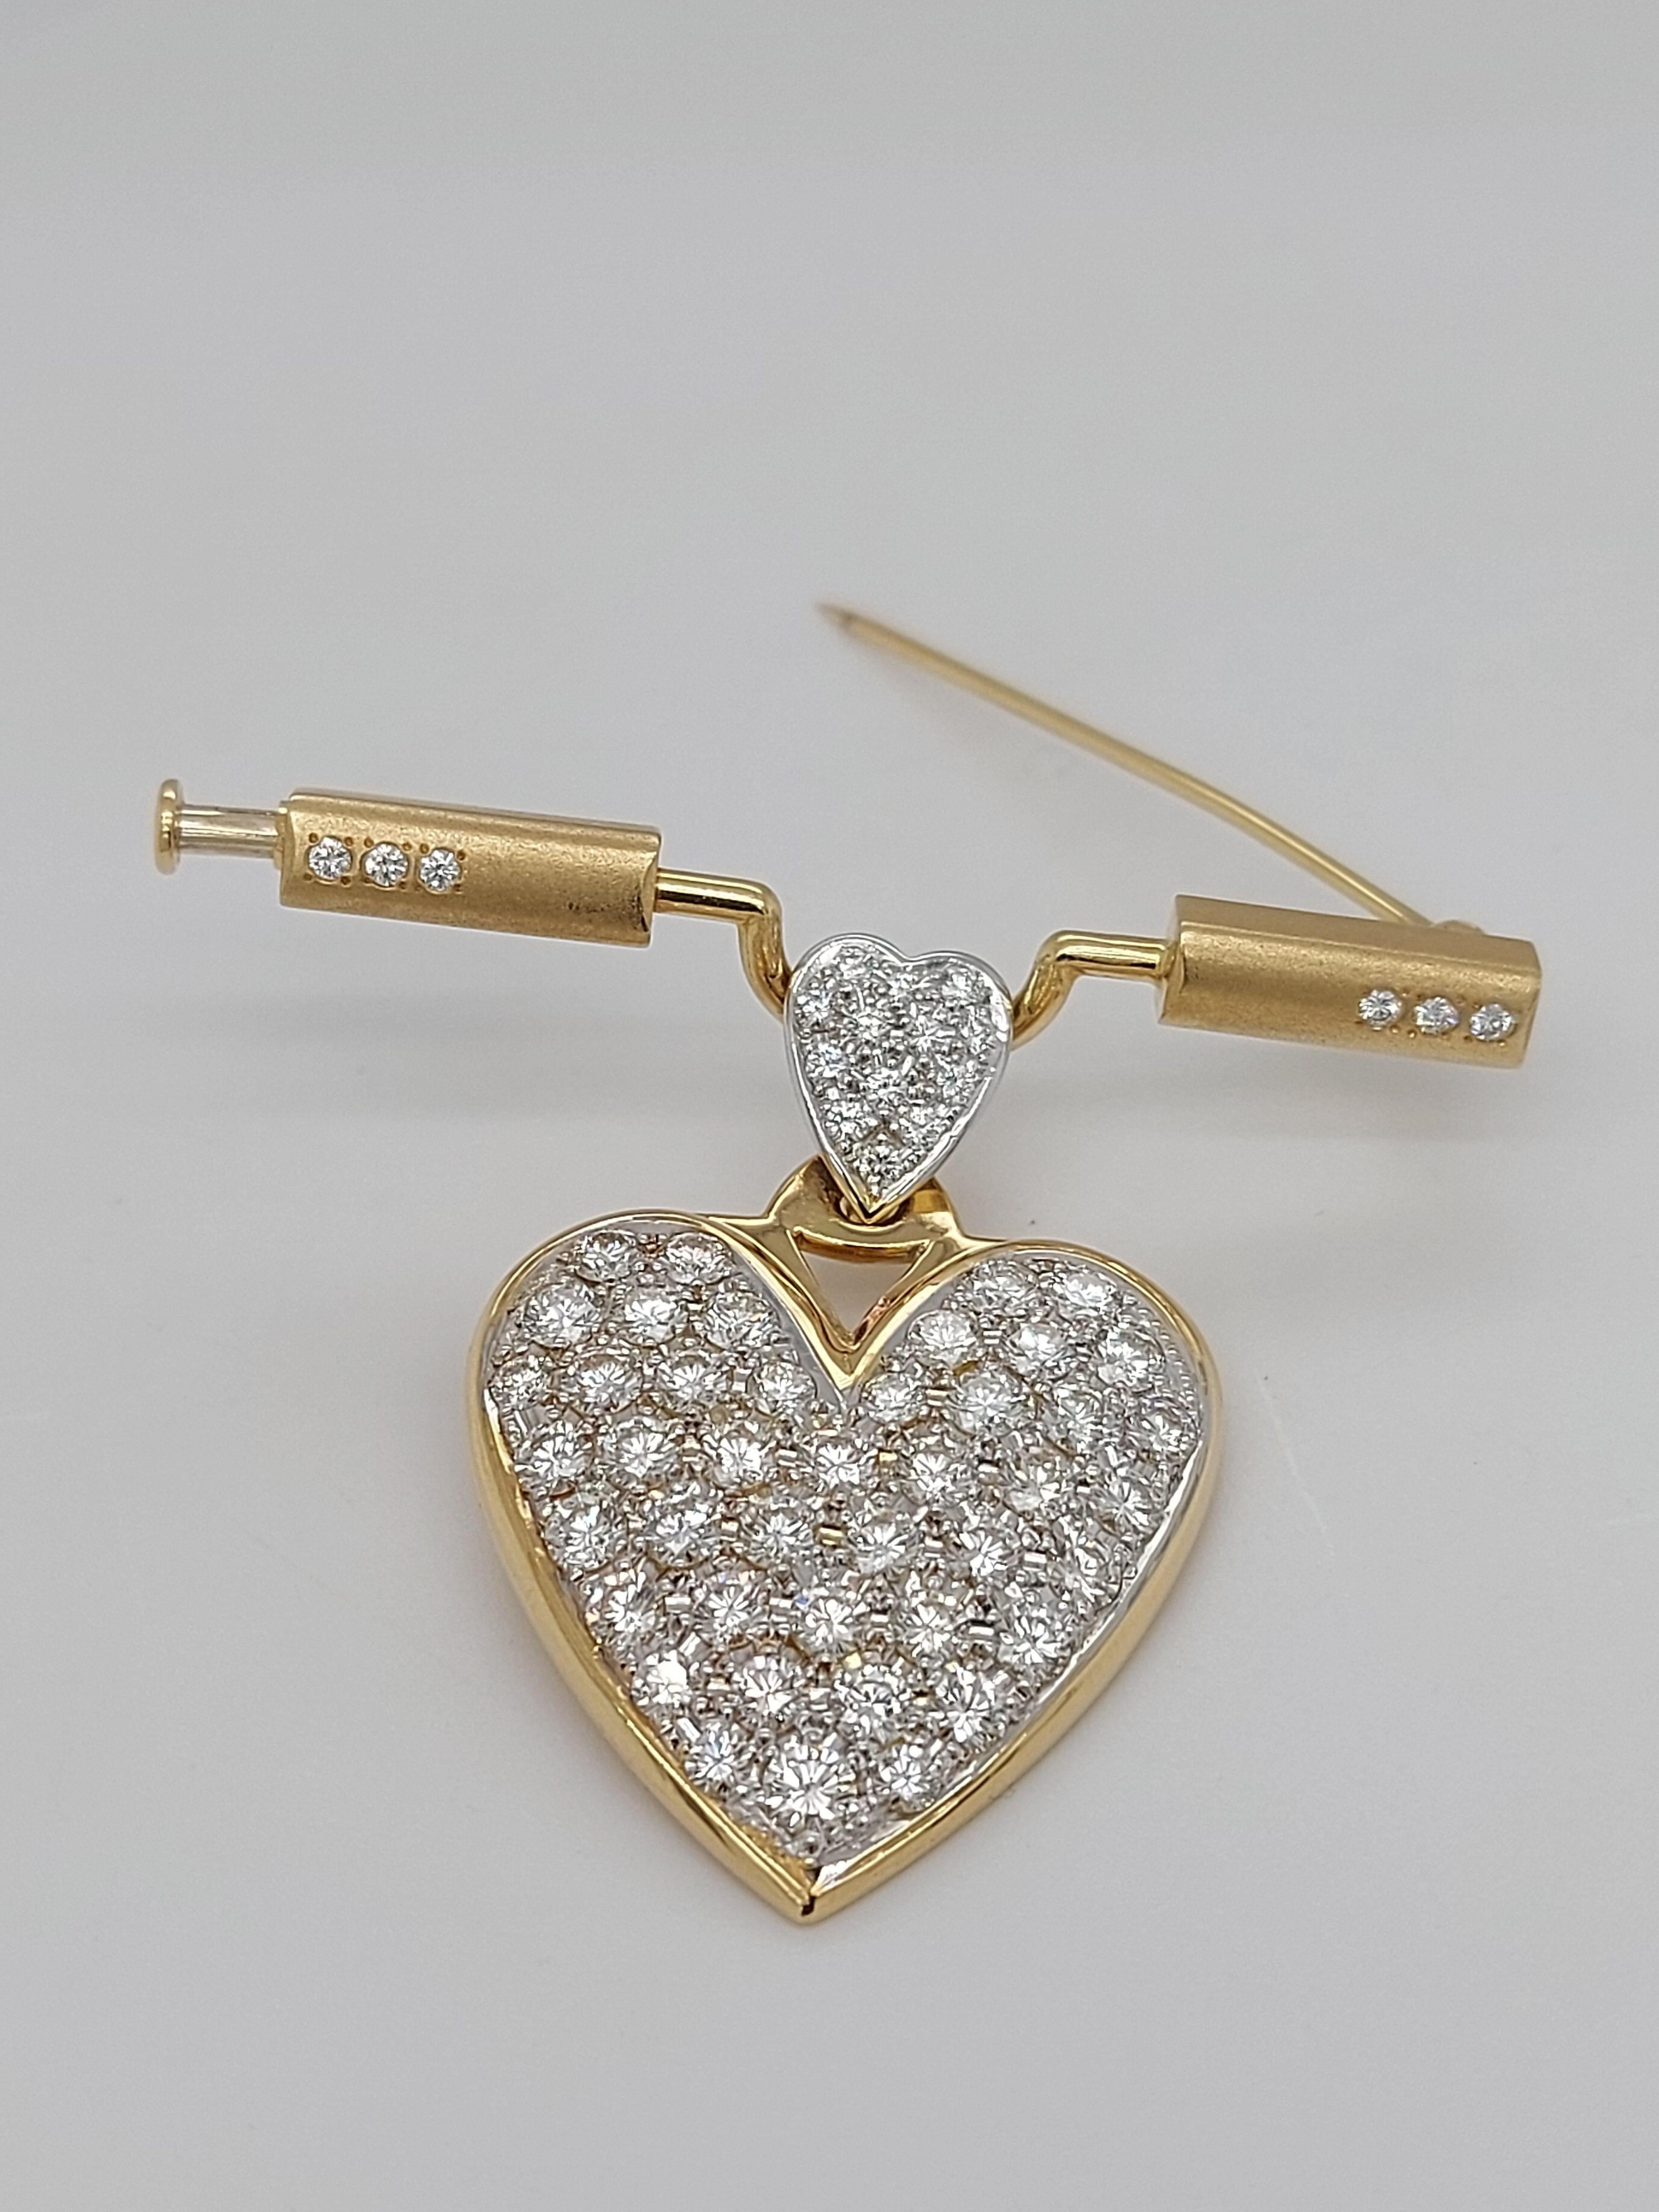 Yellow Gold Brooch with Diamond Heart Pavé Set Diamonds Dangling Down For Sale 3